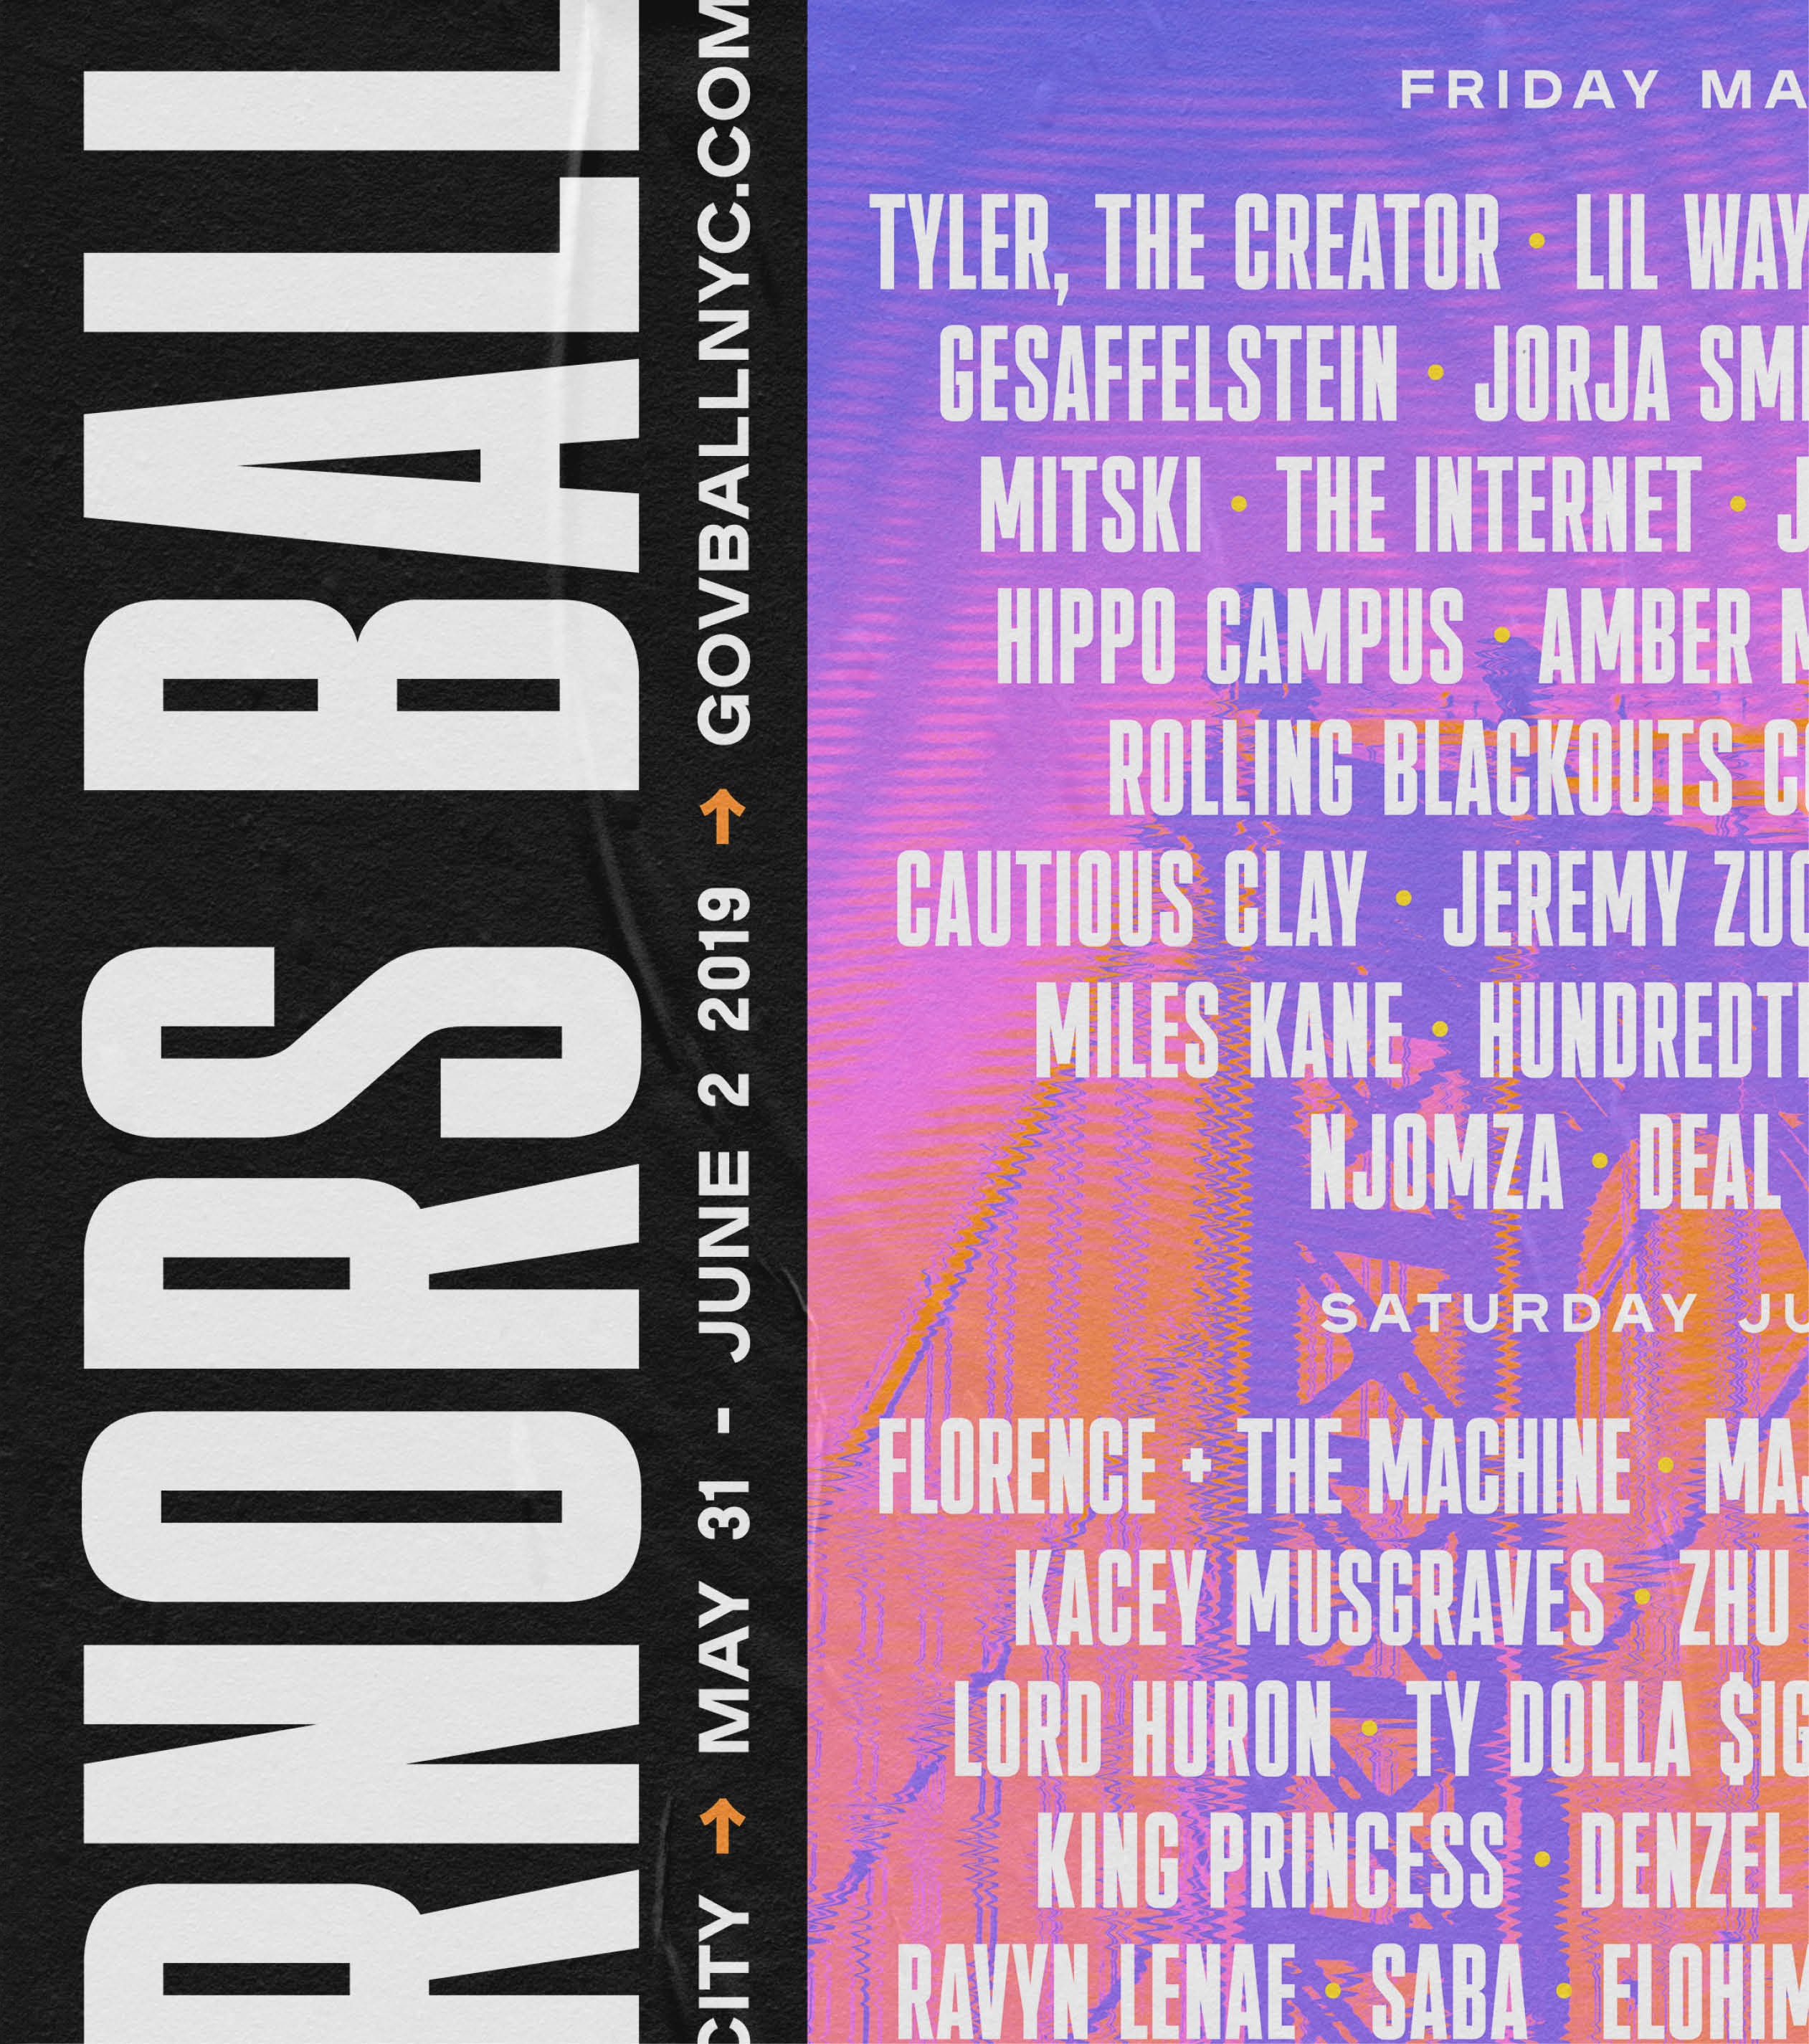 The Collected Works - GovBall 2019 - 04